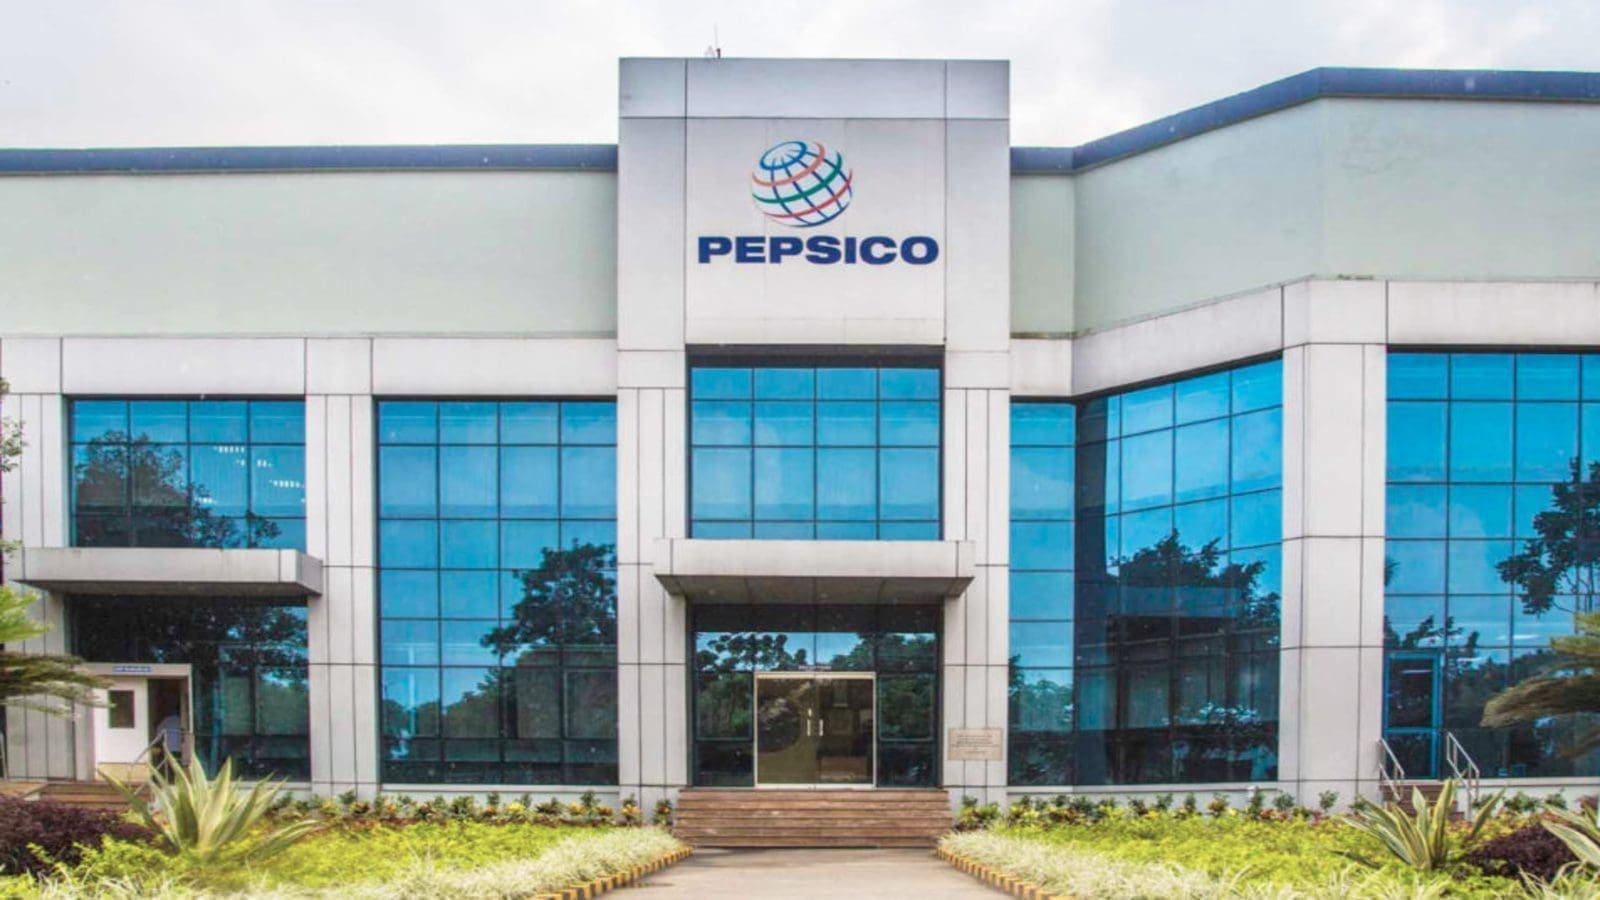 PepsiCo invests in new warehousing facility in Arizona, expands GBSC in Hyderabad